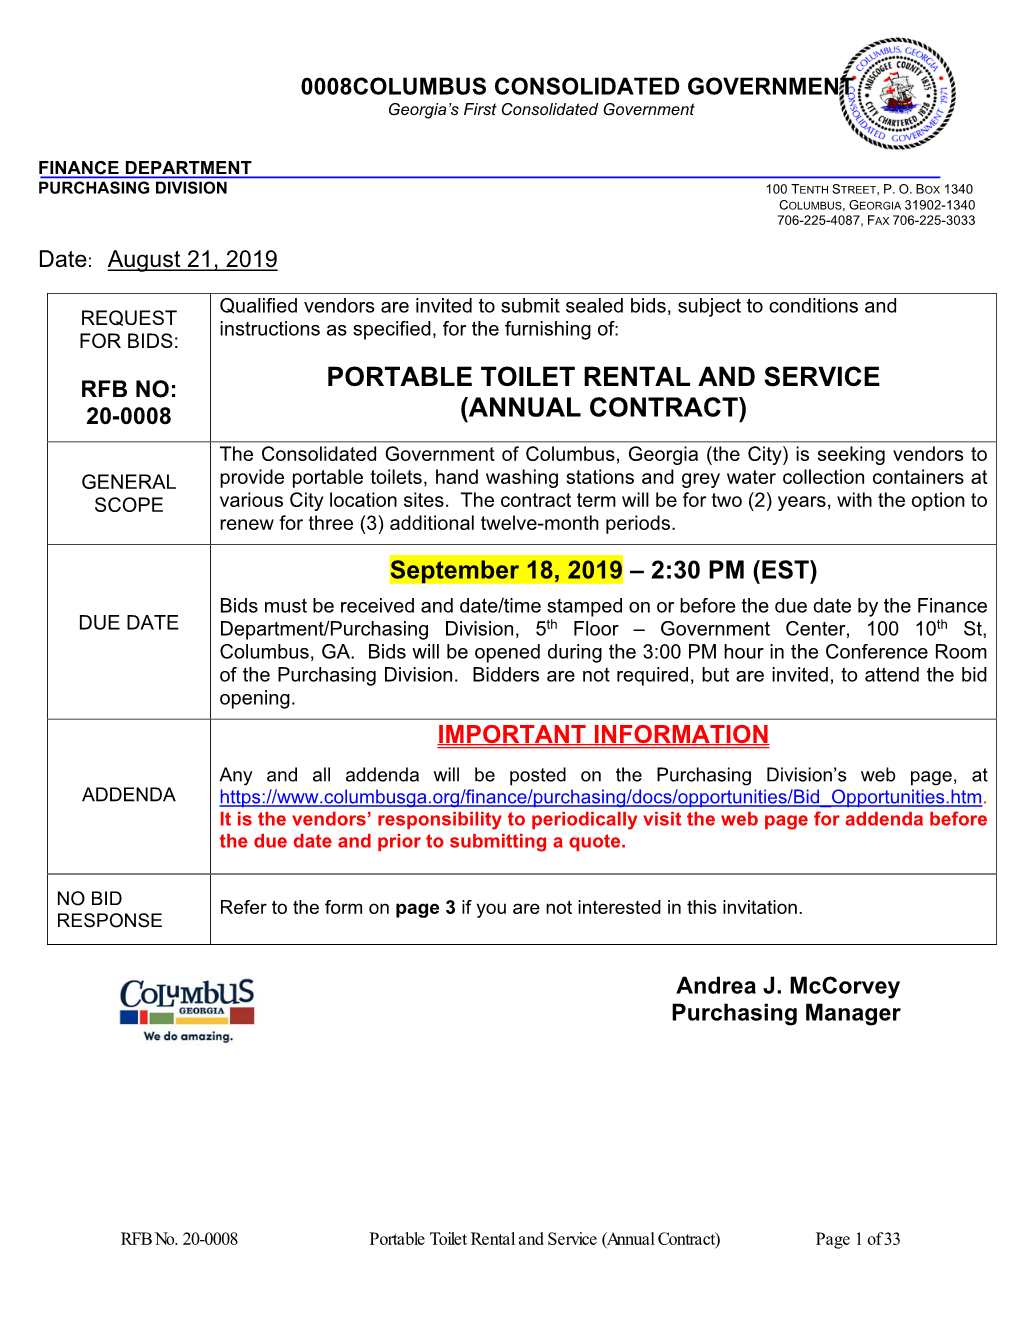 Portable Toilet Rental and Service 20-0008 (Annual Contract)